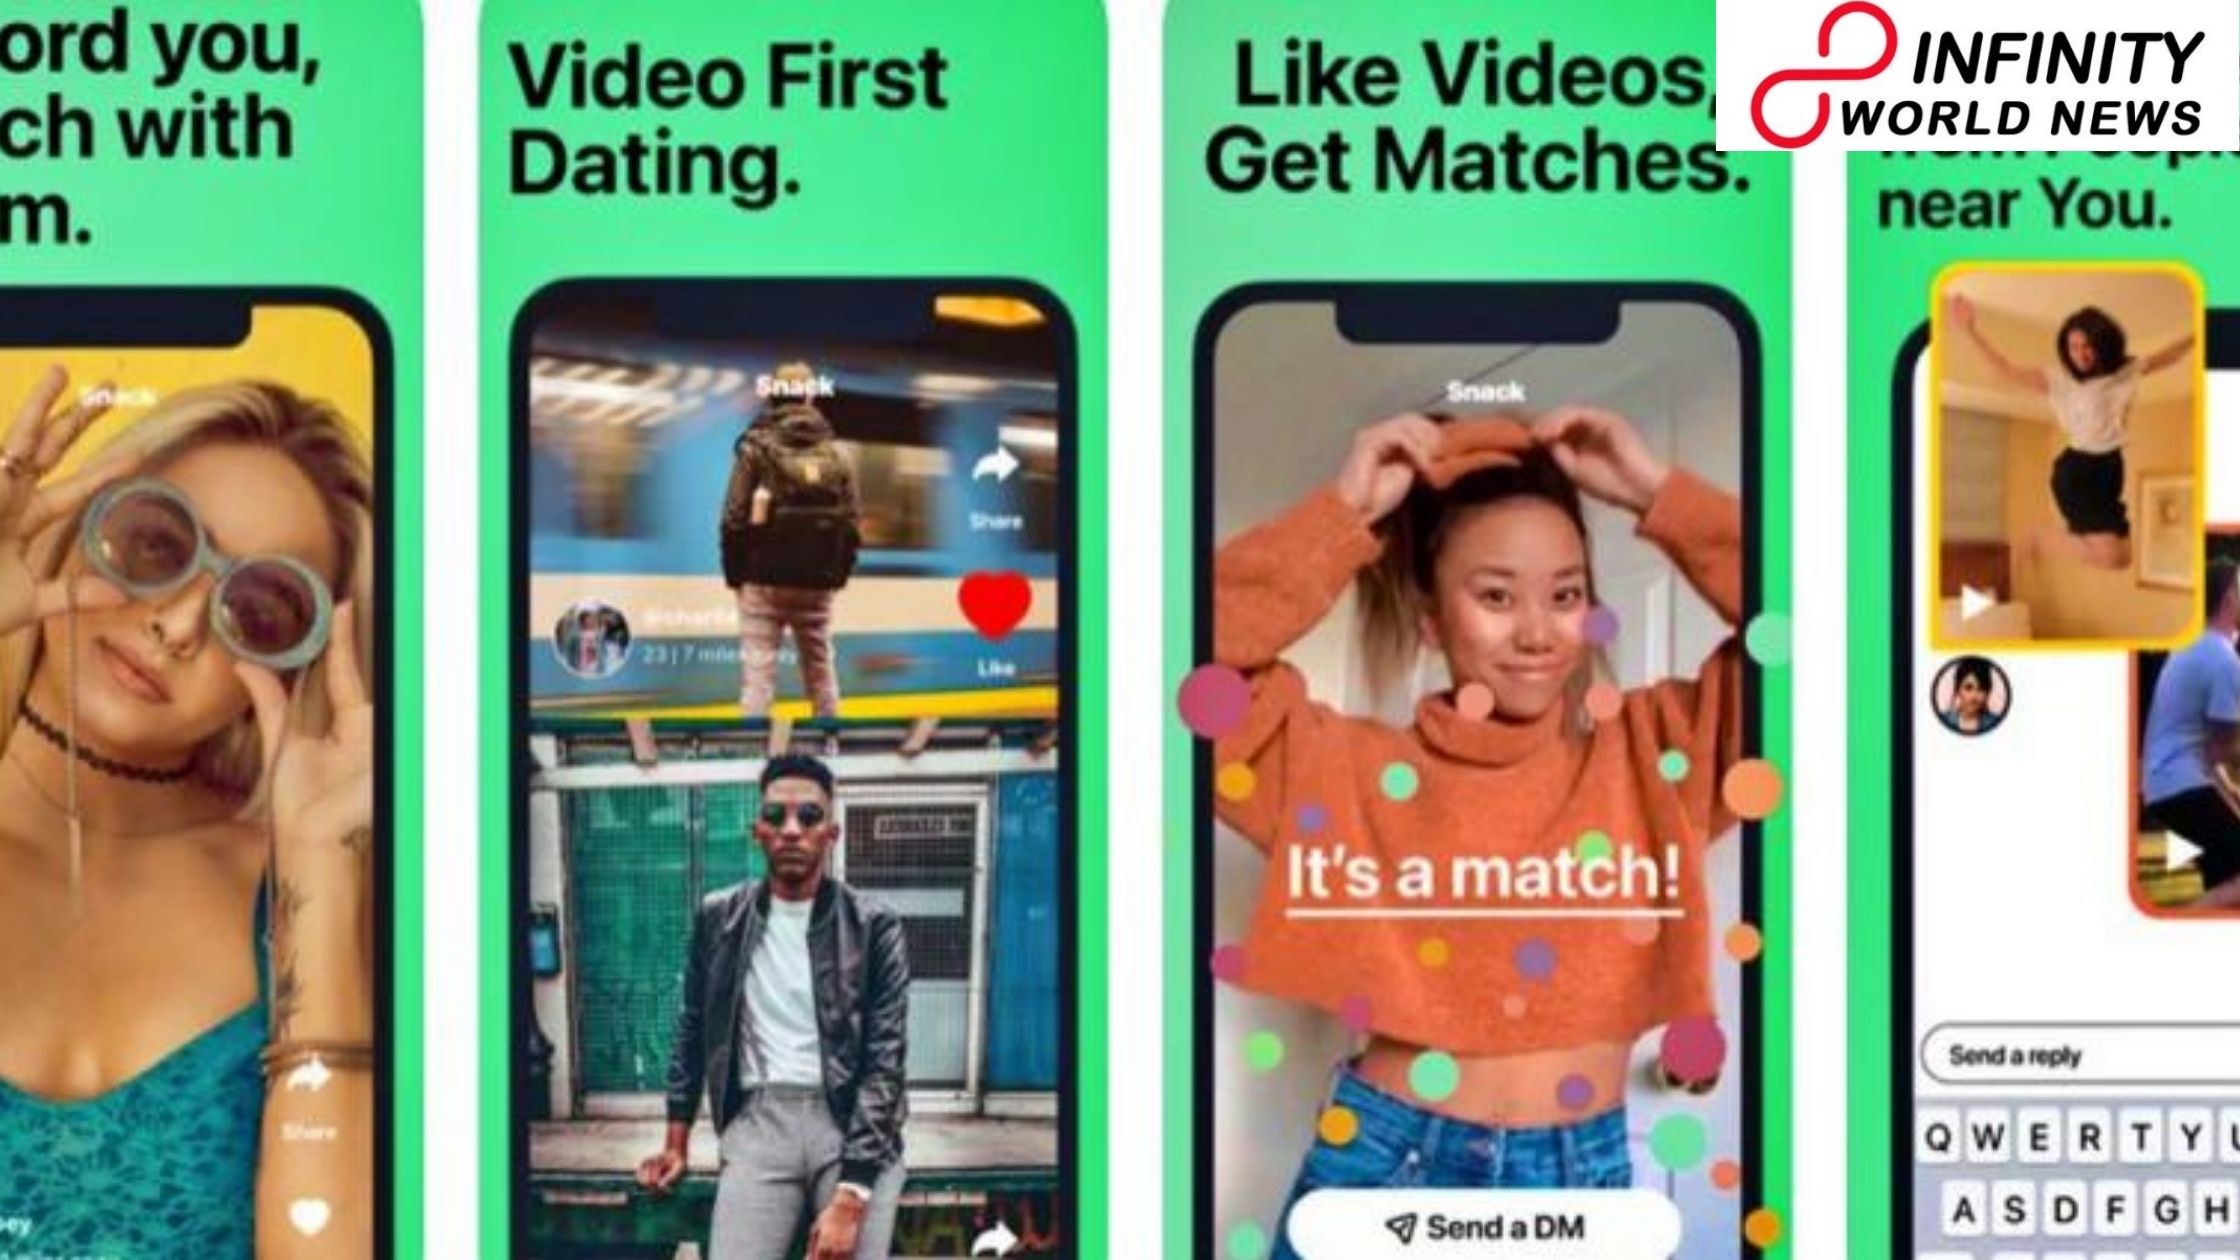 New Dating App Named 'Snack' is Trying to Invite TikTok Users by Fusing Videos in Profiles